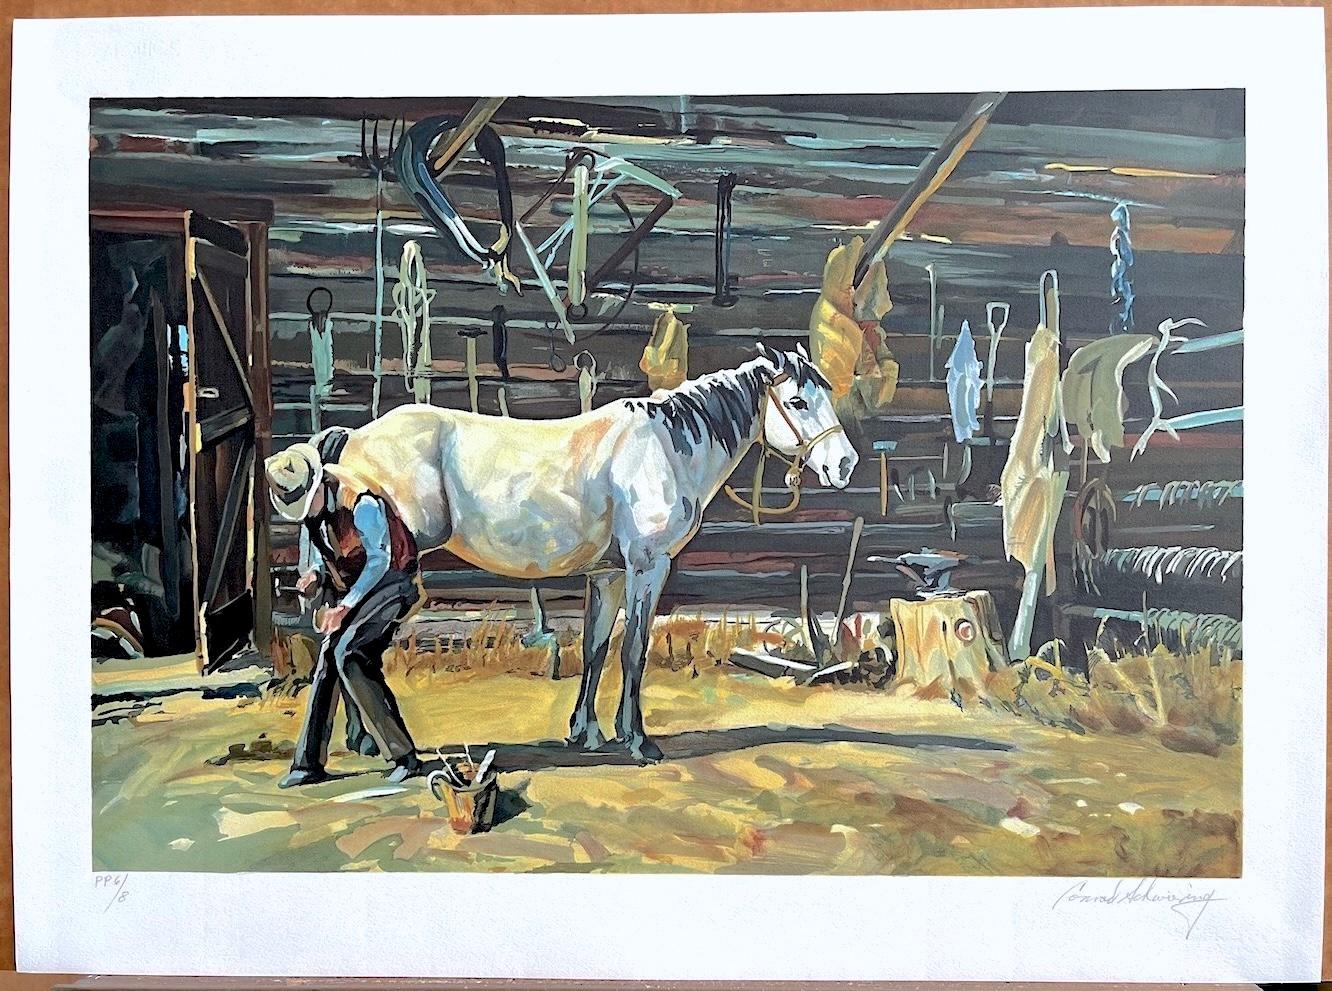 SHOE SHOP Signed Lithograph, Cowboy Farrier, Horseshoe, White Horse, Western Art - Gray Animal Print by Conrad Schwiering